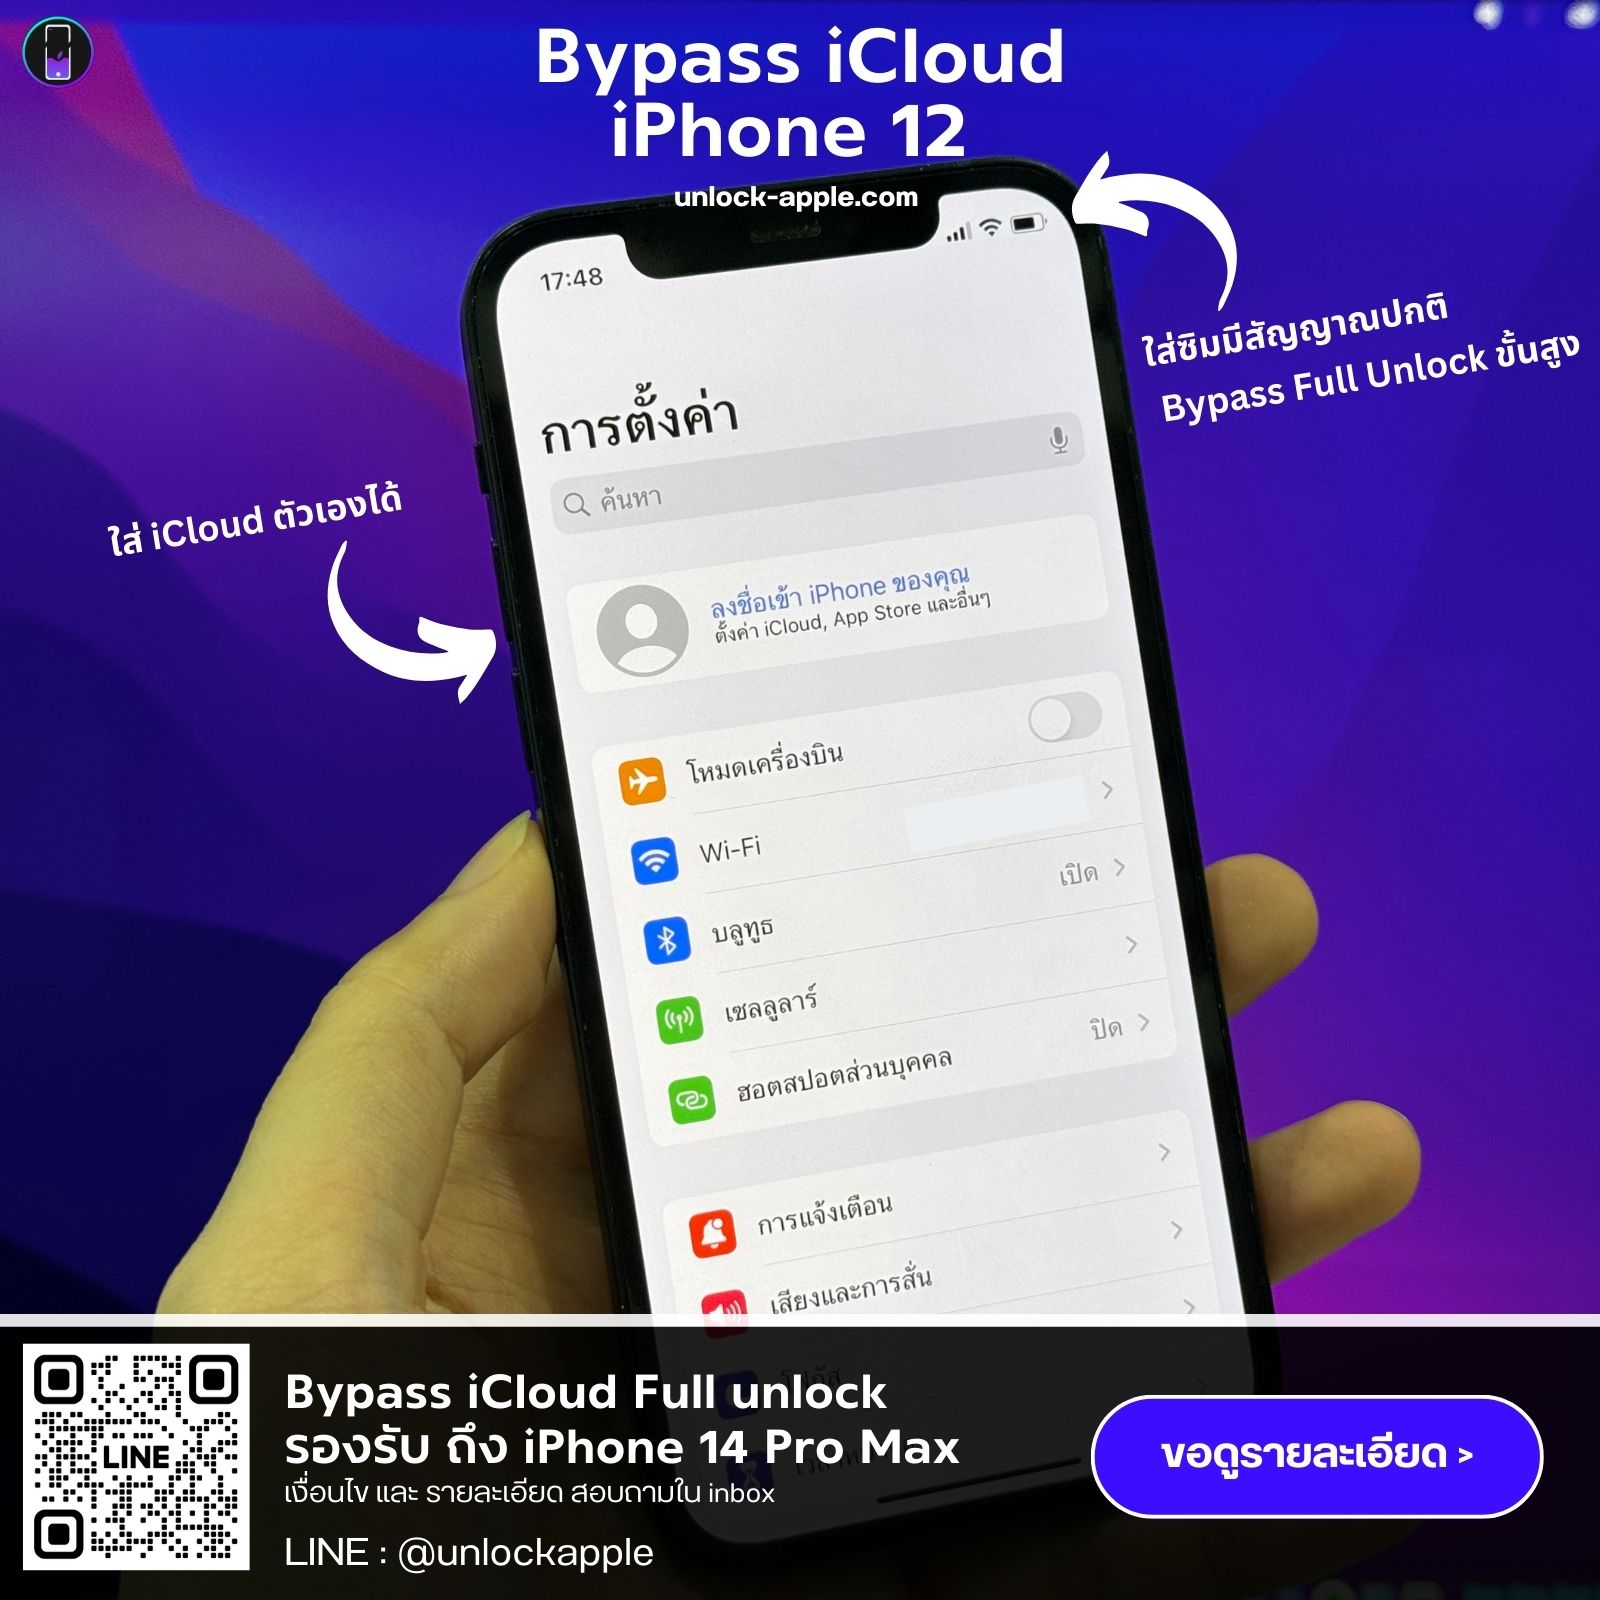 Bypass iCloud iPhone 12 -2